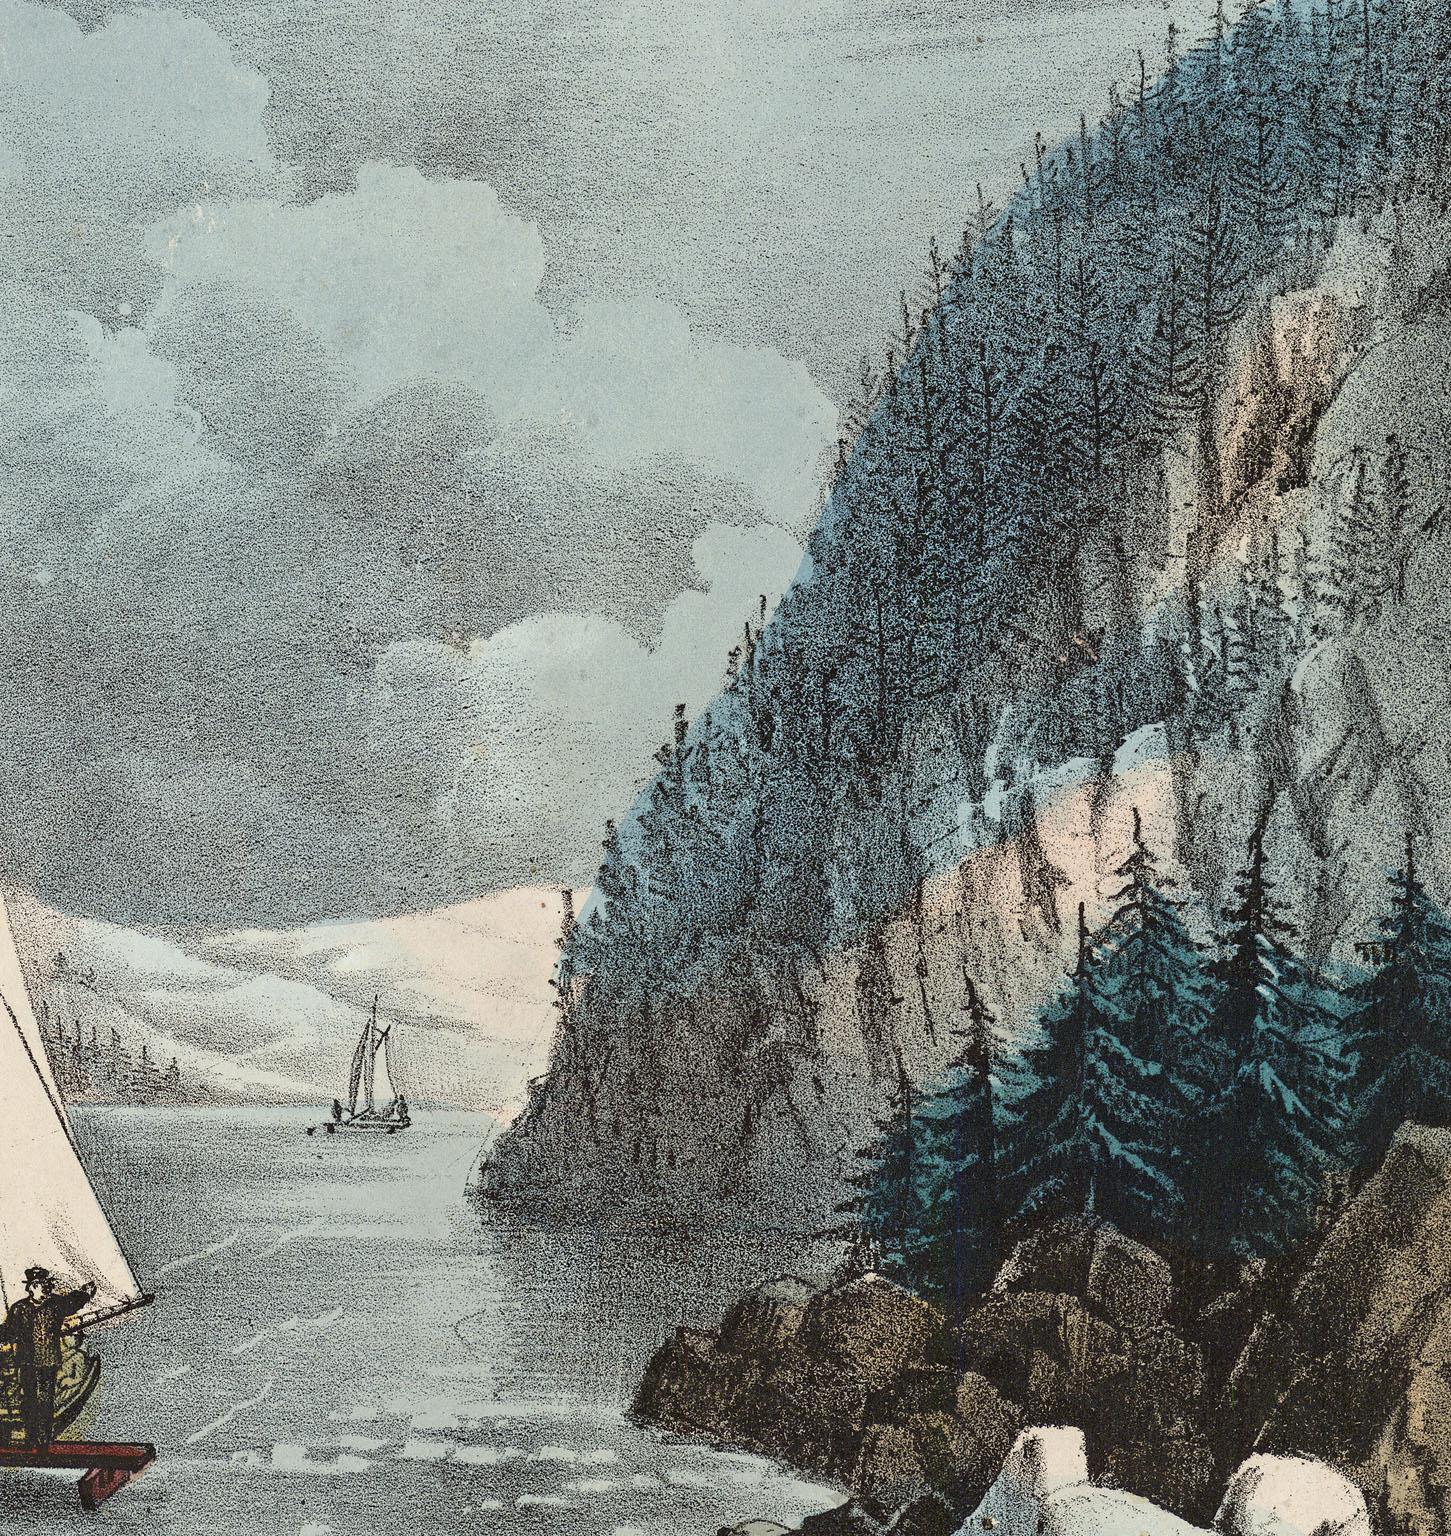 Ice-Boat Race on the Hudson. - Gray Landscape Print by Currier & Ives